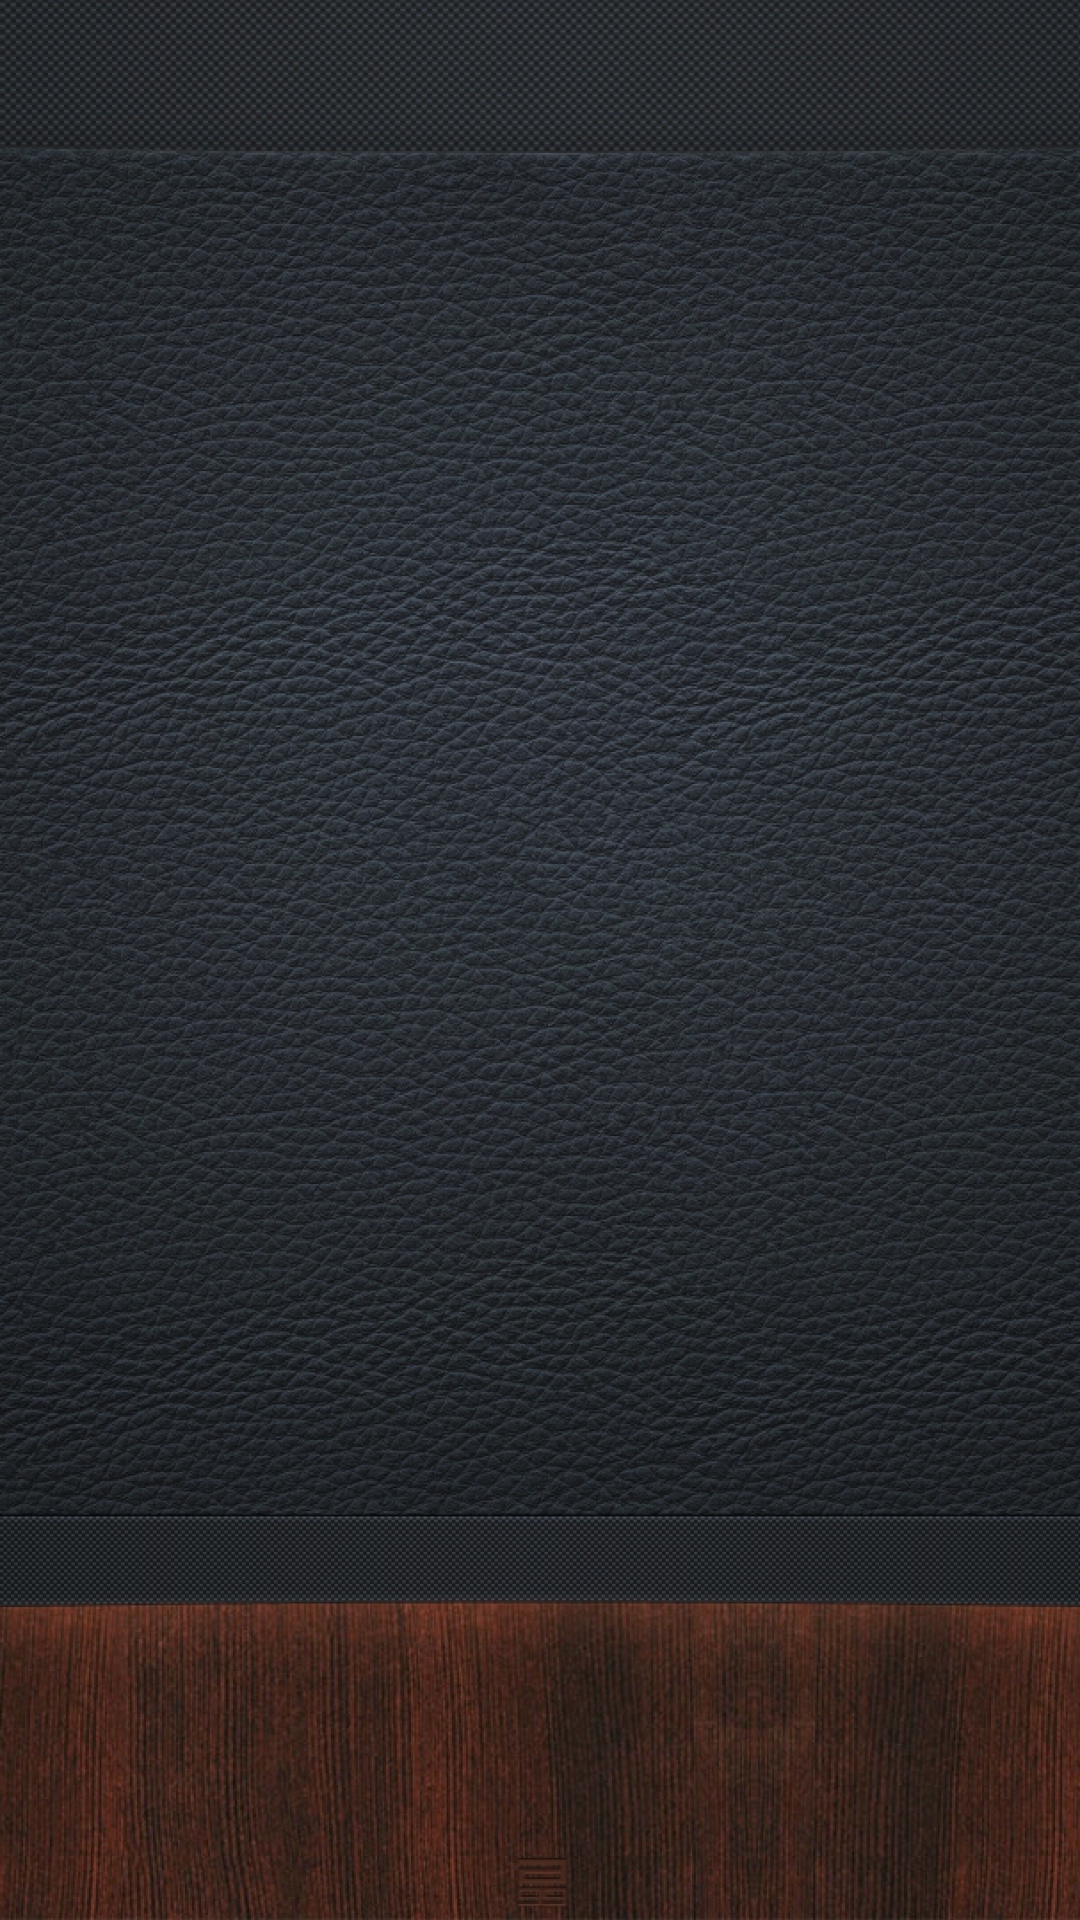 Download Wallpaper 1080x1920 surfaces leather wood dark Sony Xperia